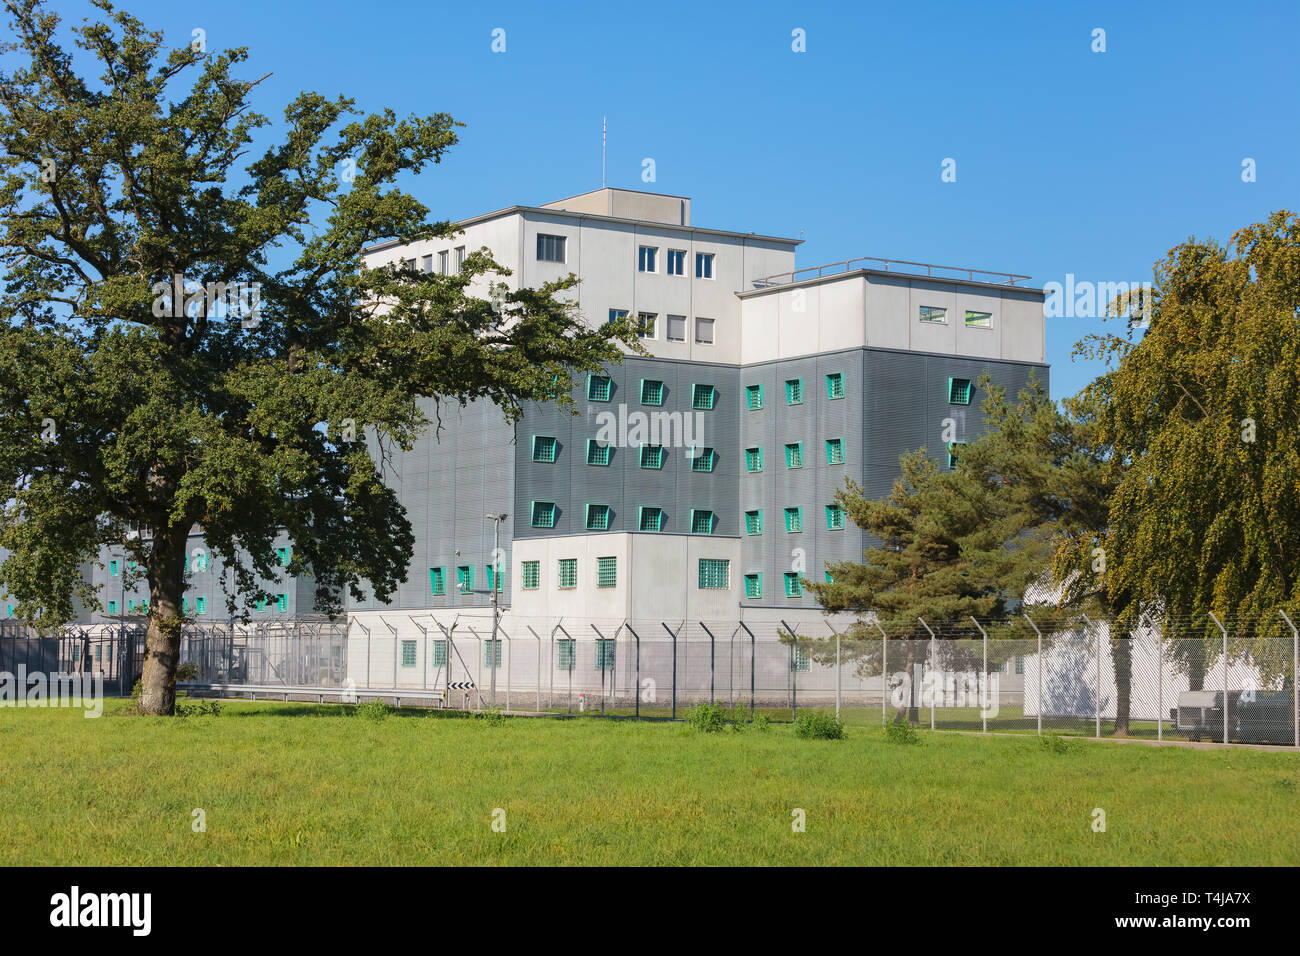 Kloten, Switzerland - September 30, 2016: the Zurich Airport Prison. The Zurich Airport Prison (German: Flughafengefangnis) is an extradition and rema Stock Photo